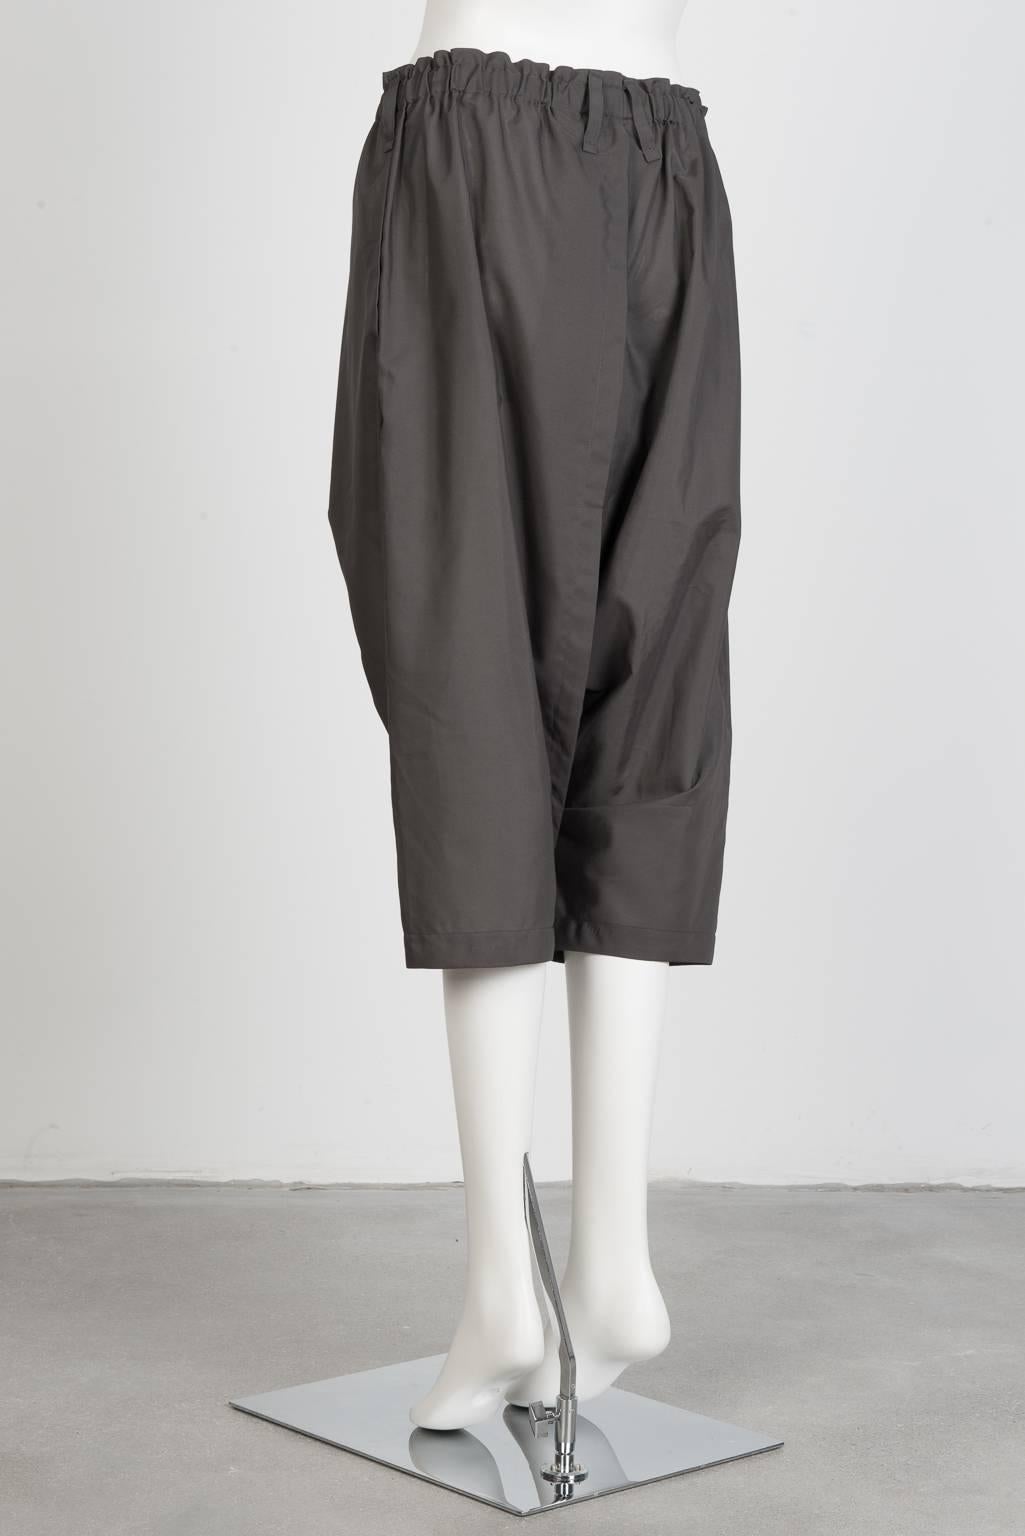 Issey Miyake Drop Crouch Pant In New Condition For Sale In Xiamen, Fujian